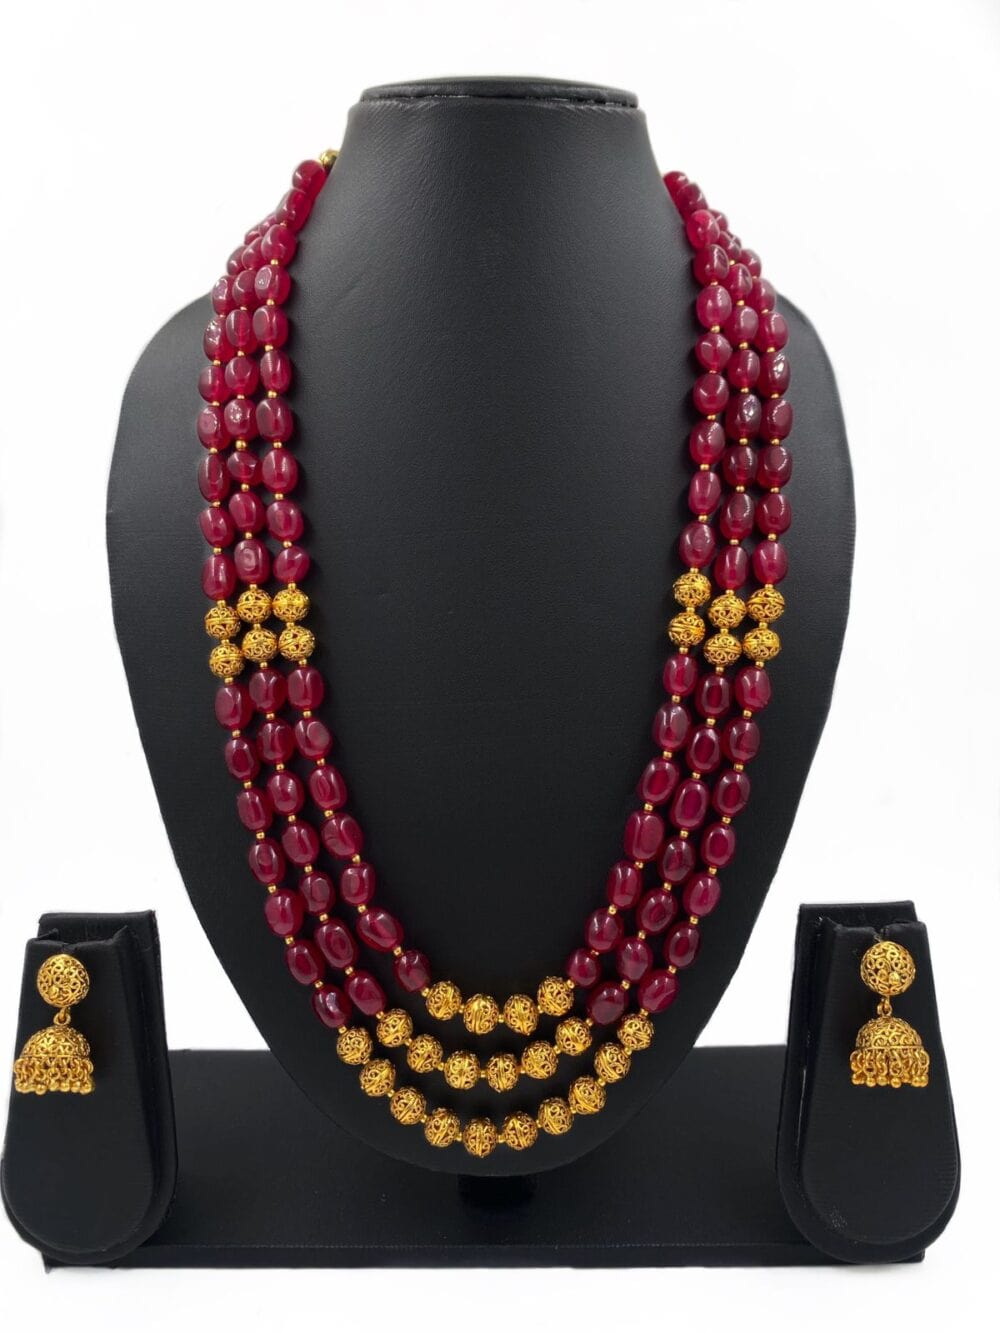 Semi Precious Multi Layered Maroon Jade Stone Beads Long Necklace For Women By Gehna Shop Beads Jewellery